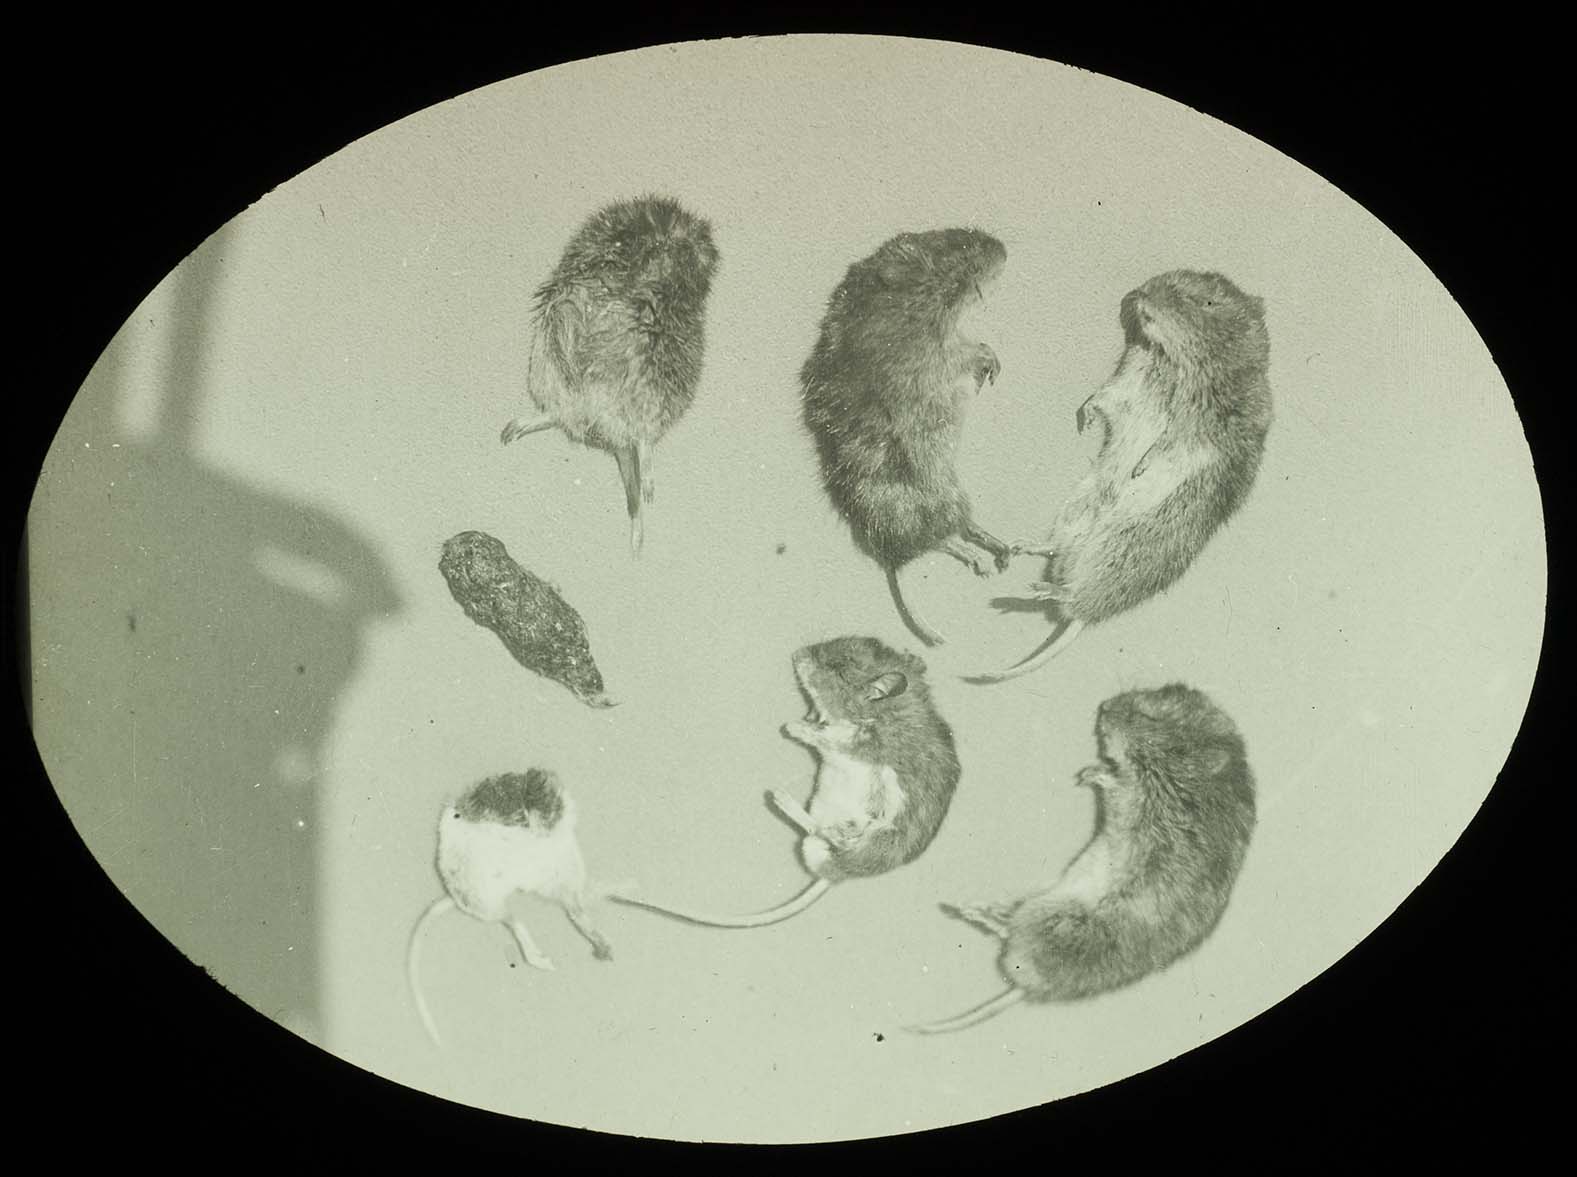 Lantern slide and photograph of mice found in Barred Owl nest